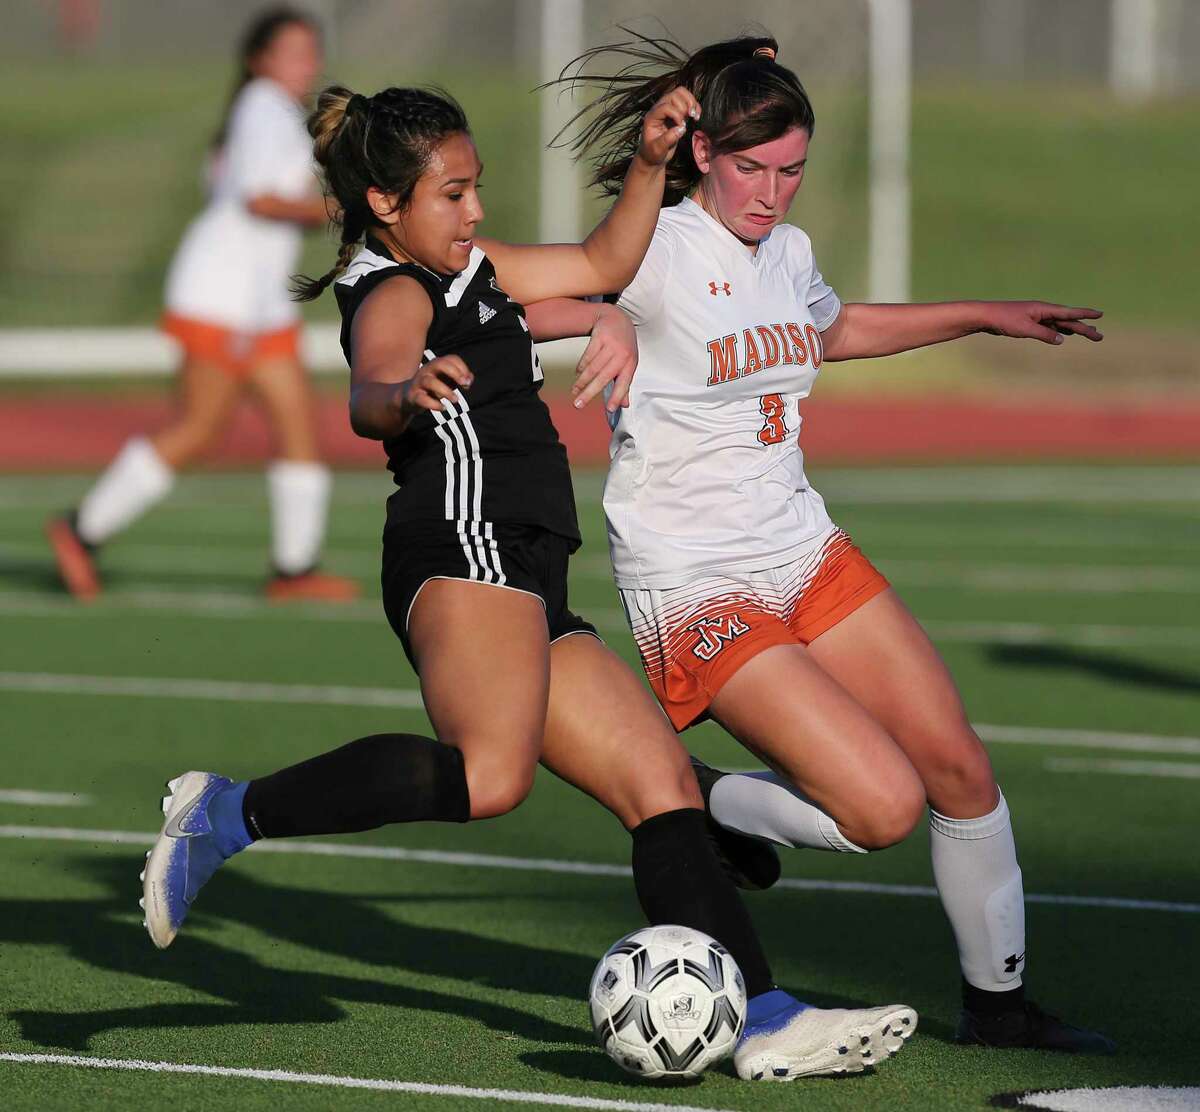 Steele’s Zoey Palma (21) looks to pass against Madison’s Jaycie Bass (03) during their Class 6A first-round girls soccer playoff game at Steele High School on Friday, March 26, 2021.